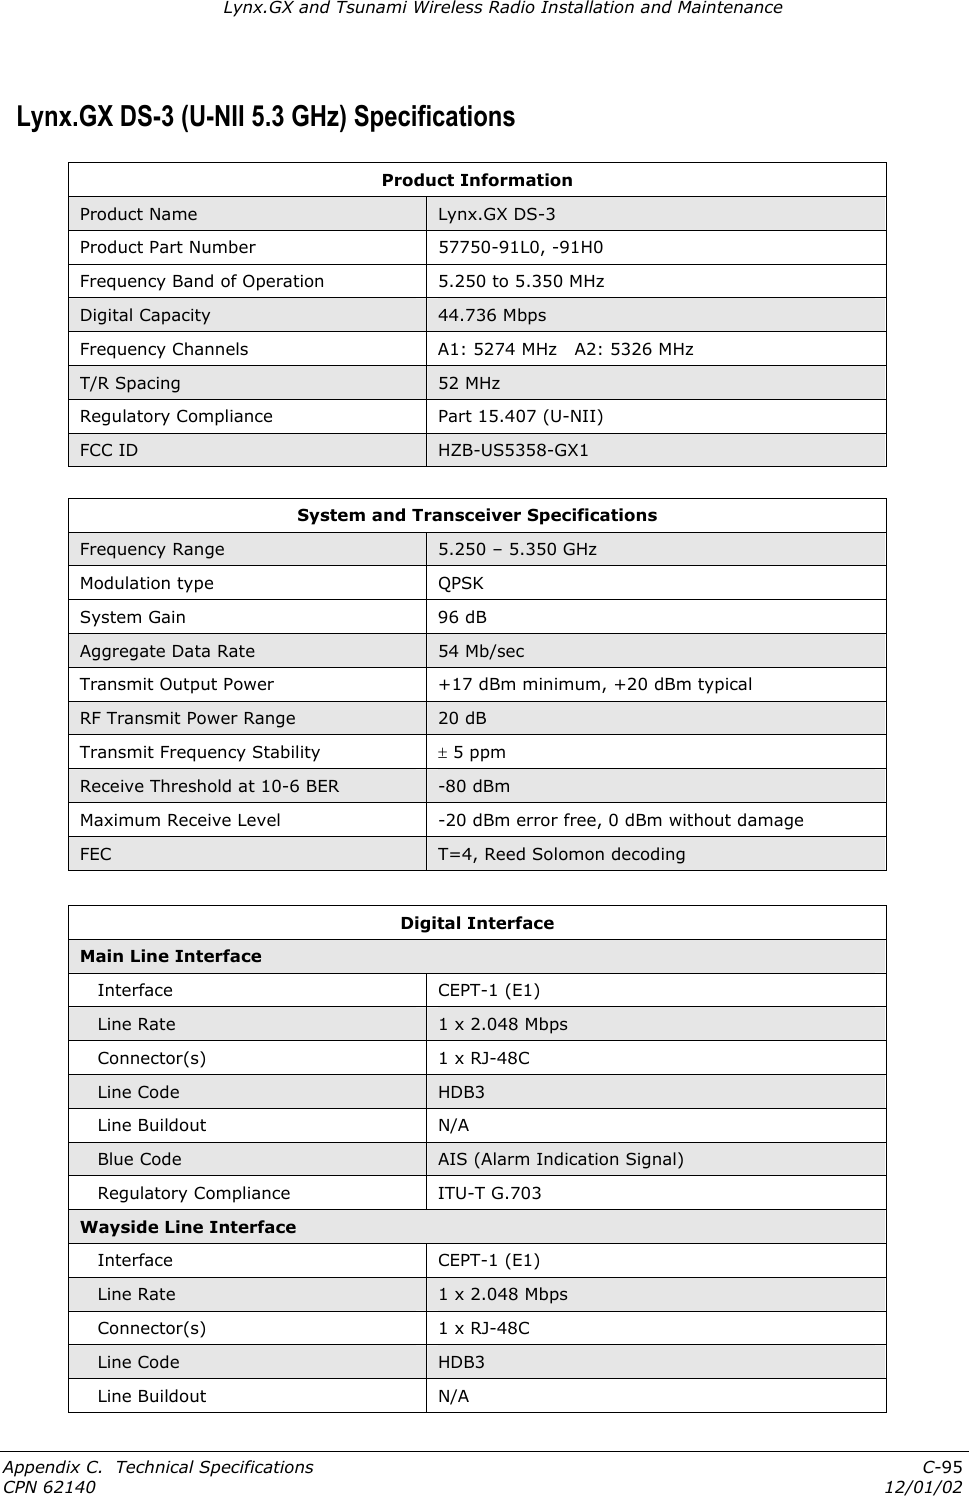 Lynx.GX and Tsunami Wireless Radio Installation and Maintenance   Lynx.GX DS-3 (U-NII 5.3 GHz) Specifications    Product Information Product Name  Lynx.GX DS-3 Product Part Number  57750-91L0, -91H0  Frequency Band of Operation  5.250 to 5.350 MHz Digital Capacity  44.736 Mbps Frequency Channels  A1: 5274 MHz   A2: 5326 MHz T/R Spacing  52 MHz Regulatory Compliance  Part 15.407 (U-NII) FCC ID  HZB-US5358-GX1  System and Transceiver Specifications Frequency Range  5.250 – 5.350 GHz Modulation type  QPSK System Gain  96 dB Aggregate Data Rate  54 Mb/sec Transmit Output Power  +17 dBm minimum, +20 dBm typical RF Transmit Power Range  20 dB Transmit Frequency Stability  ± 5 ppm  Receive Threshold at 10-6 BER  -80 dBm Maximum Receive Level  -20 dBm error free, 0 dBm without damage FEC  T=4, Reed Solomon decoding  Digital Interface Main Line Interface    Interface  CEPT-1 (E1)     Line Rate  1 x 2.048 Mbps    Connector(s)  1 x RJ-48C    Line Code  HDB3    Line Buildout  N/A    Blue Code  AIS (Alarm Indication Signal)    Regulatory Compliance  ITU-T G.703 Wayside Line Interface    Interface  CEPT-1 (E1)     Line Rate  1 x 2.048 Mbps    Connector(s)  1 x RJ-48C    Line Code  HDB3    Line Buildout  N/A Appendix C.  Technical Specifications  C-95 CPN 62140  12/01/02 